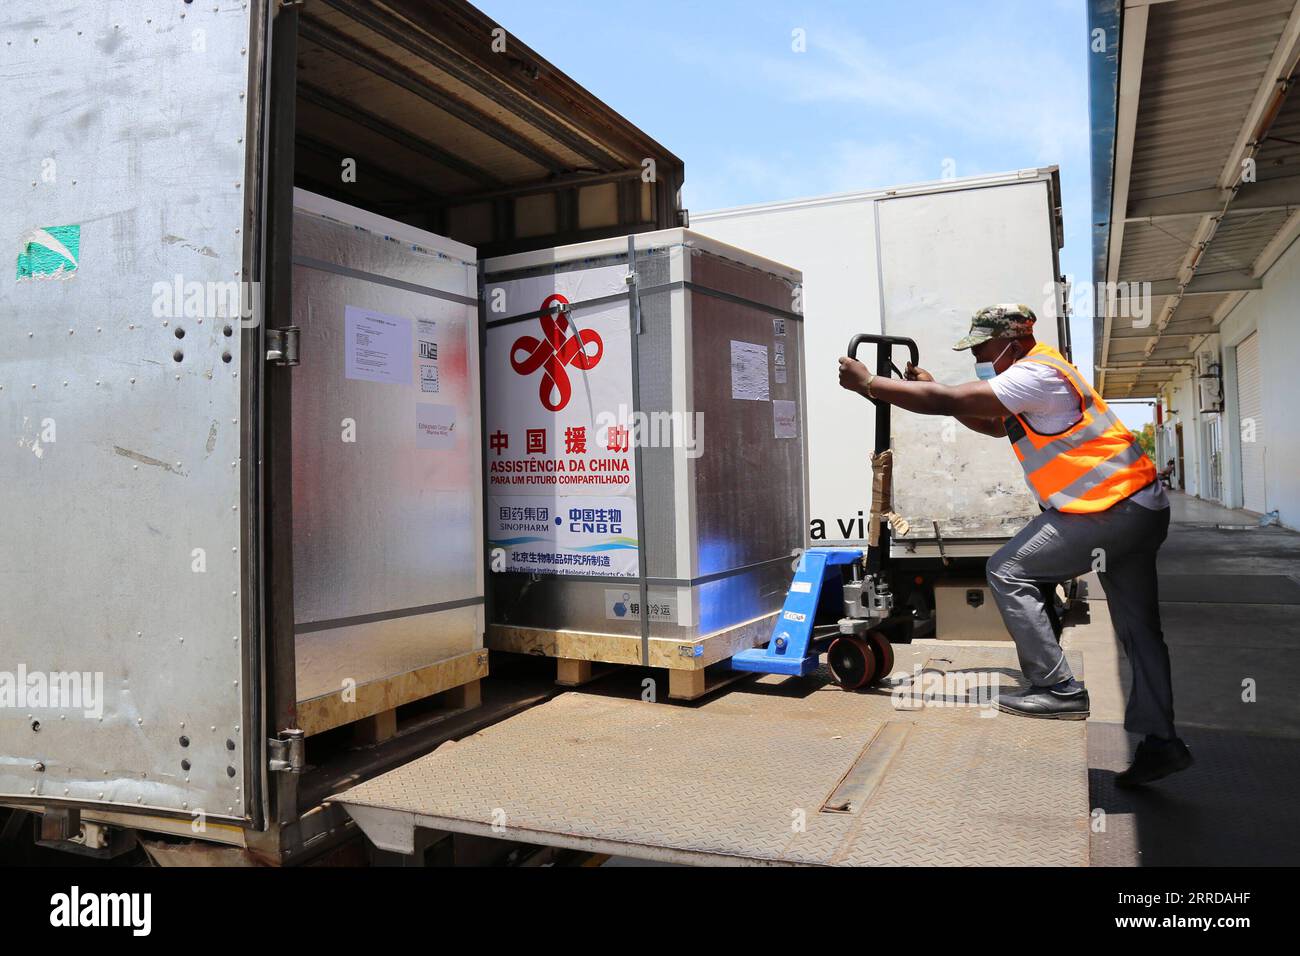 211214 -- MAPUTO, Dec. 14, 2021 -- A staff member transfers the new batch of COVID-19 Sinopharm vaccines donated by China at the Maputo International Airport in Maputo, Mozambique, Dec. 12, 2021. Another batch of COVID-19 Sinopharm vaccines donated by China has arrived in Mozambique to help the African country better deal with the pandemic.  MOZAMBIQUE-MAPUTO-CHINA-DONATED VACCINES-ARRIVAL NiexZuguo PUBLICATIONxNOTxINxCHN Stock Photo